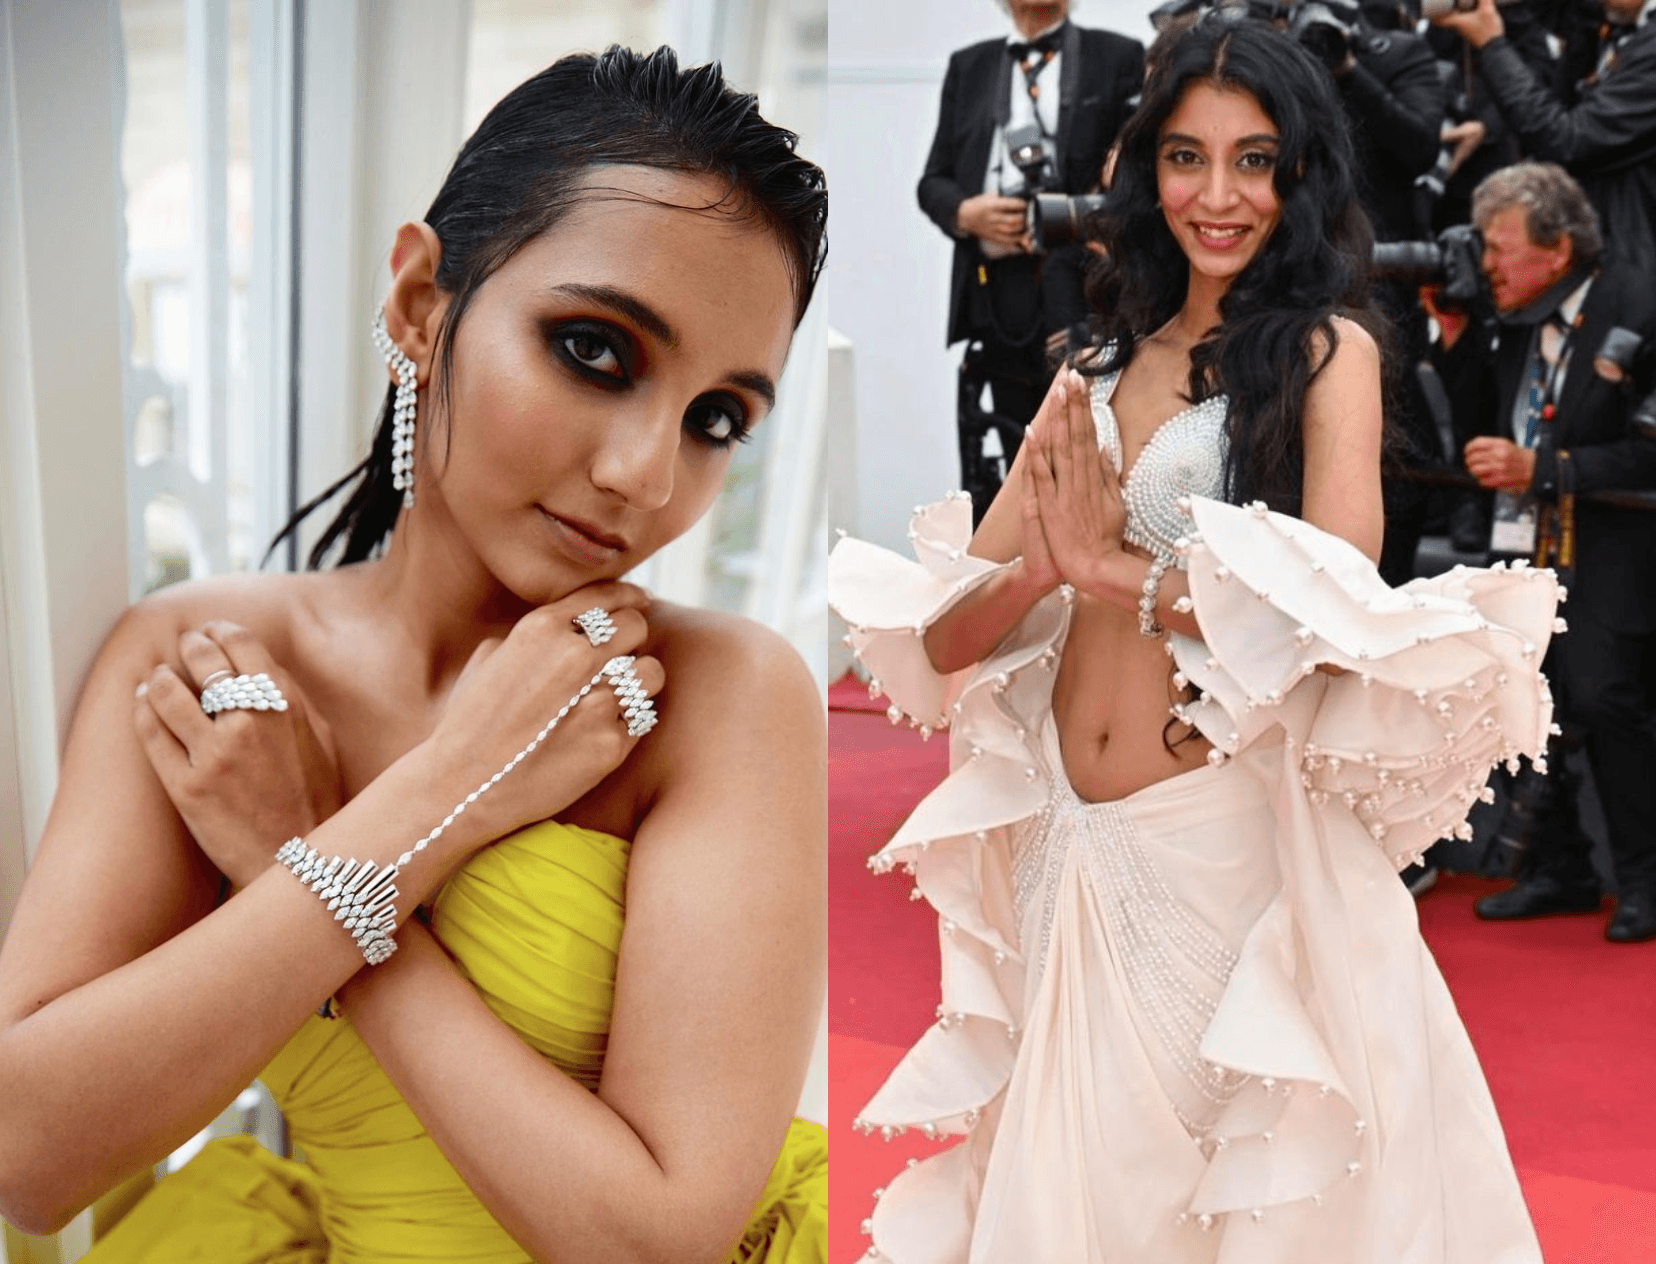 Masoom Minawala, Dolly Singh &amp; More: What The Influencers Wore To Cannes